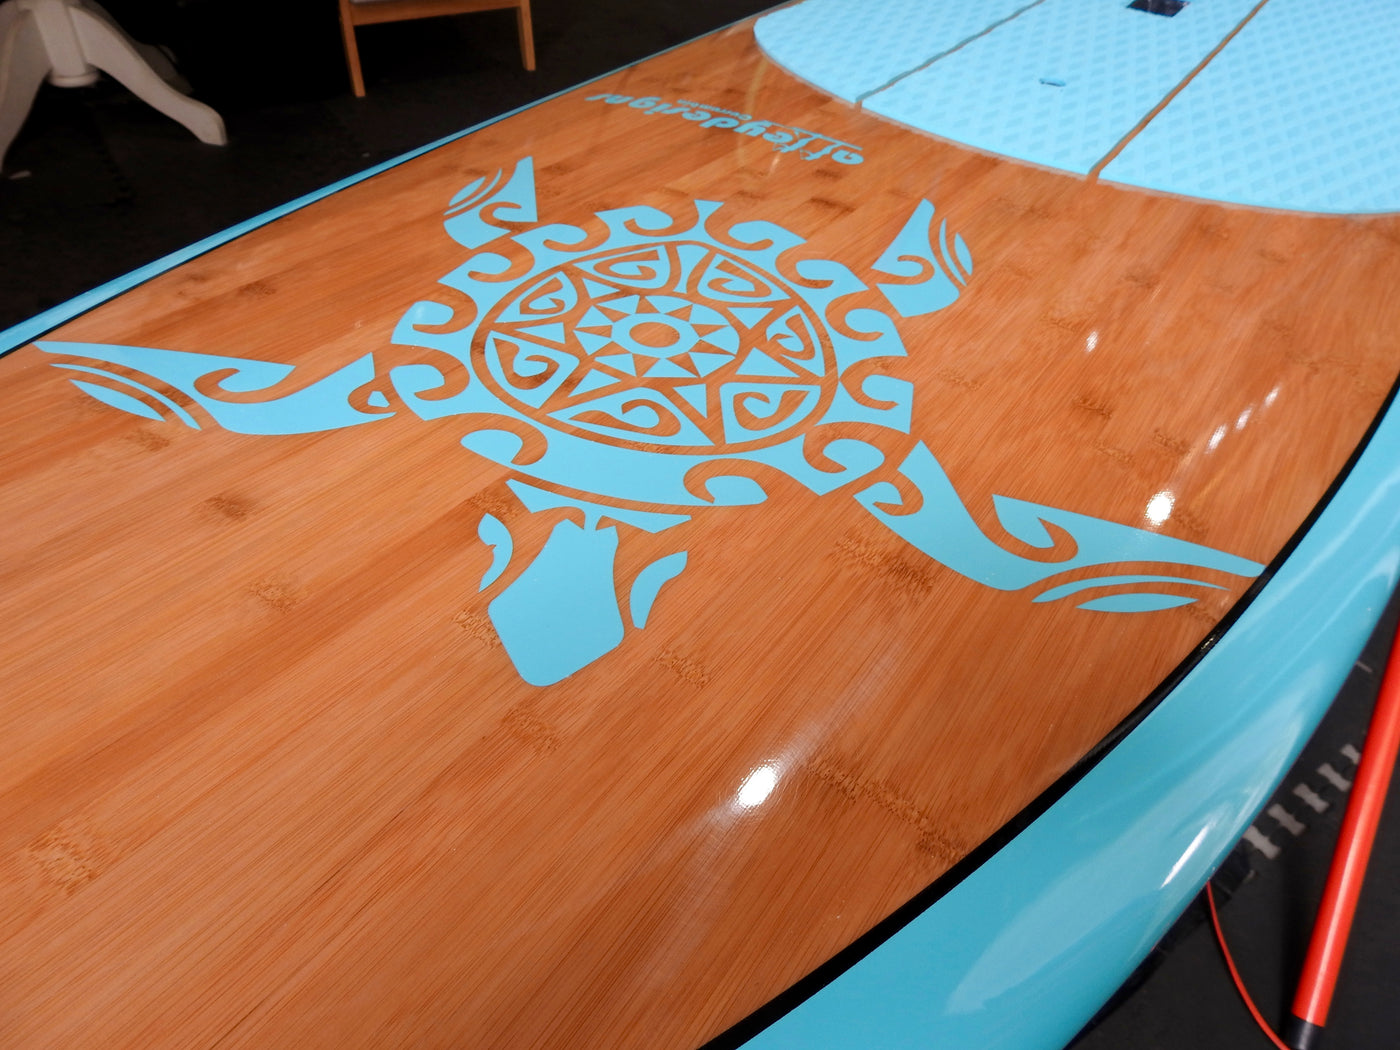 9'6" x 31" Bamboo Deck Teal Turtle Performance Alleydesigns SUP 8kg - Alleydesigns  Pty Ltd                                             ABN: 44165571264